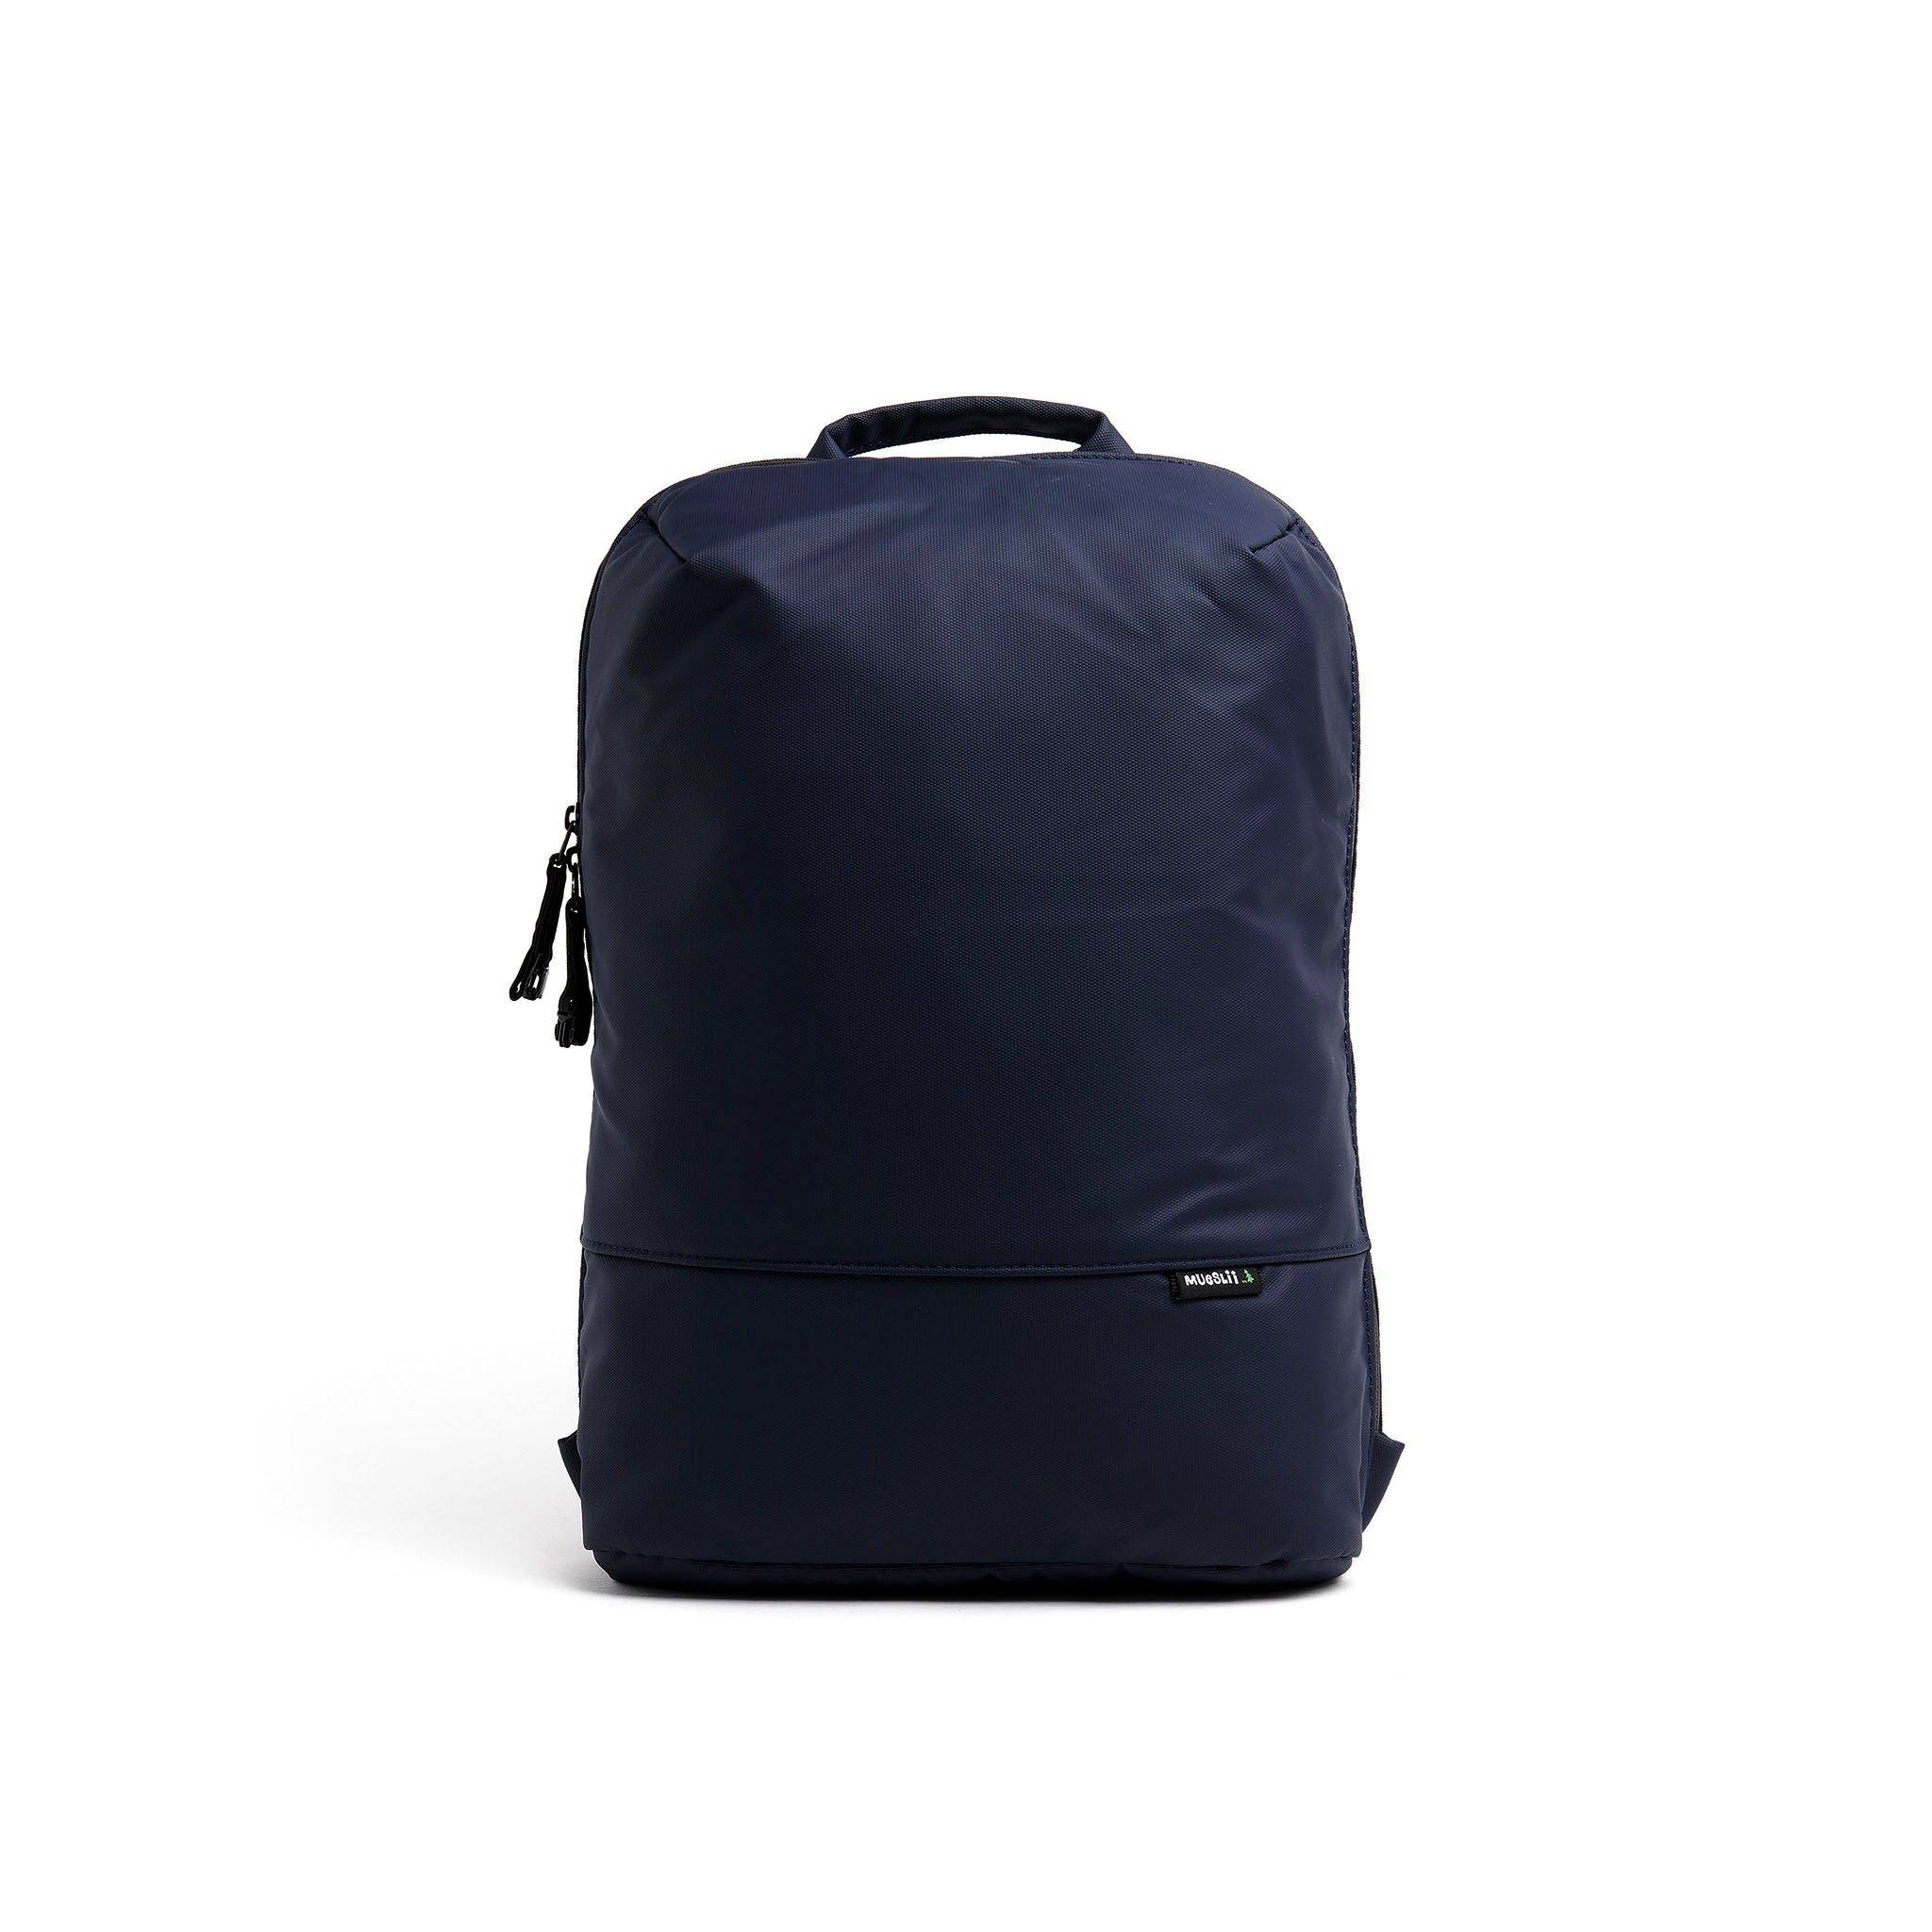 Mueslii daily backpack, made of PU coated waterproof nylon, with a laptop compartment, color midnight blue, front view.